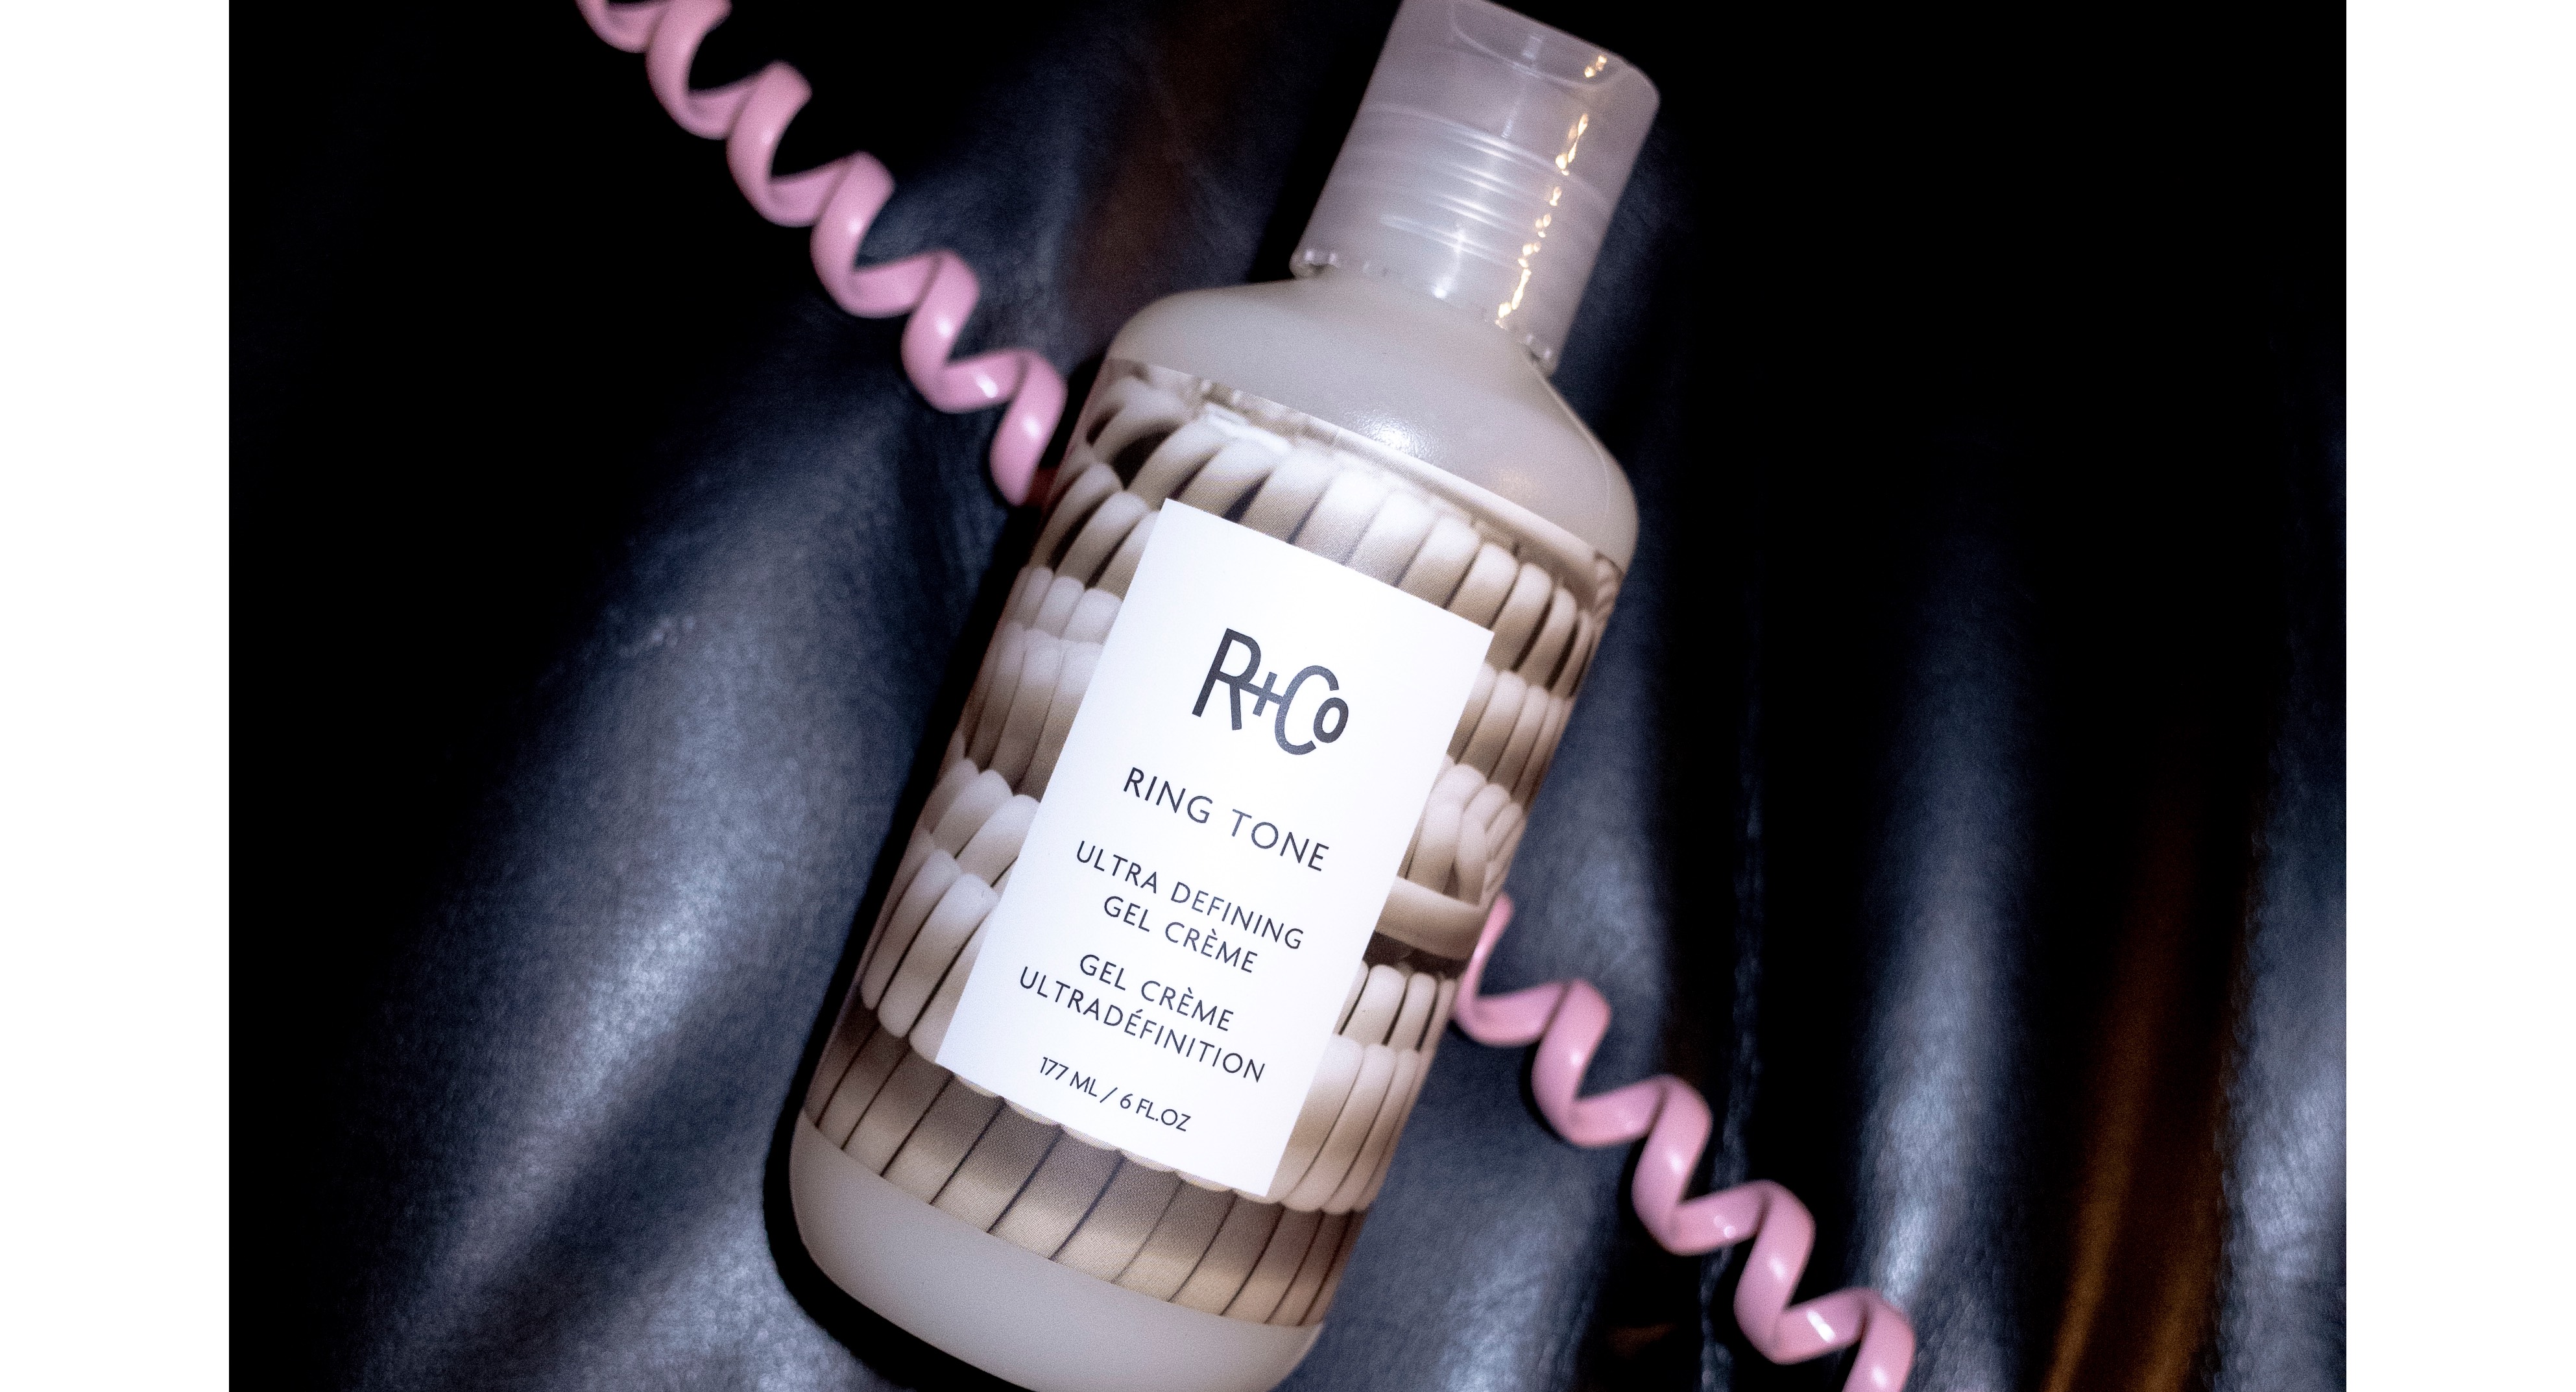 Vegan Hair Care Brand R+Co Introduces Ring Tone Ultra Defining Gel Crème for Textured Hair